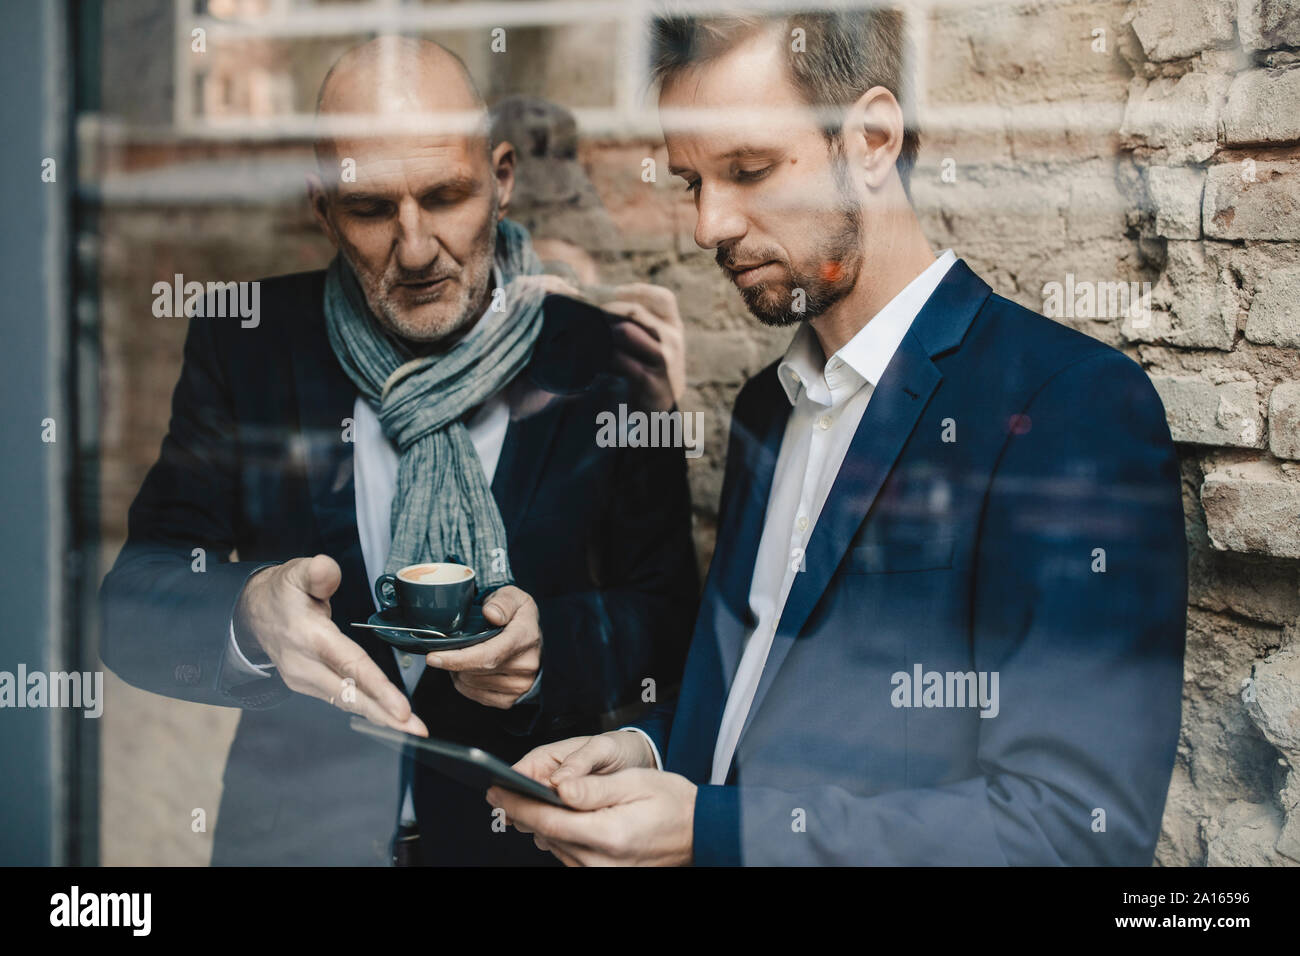 Senior and mid-adult businessman sharing a tablet Stock Photo